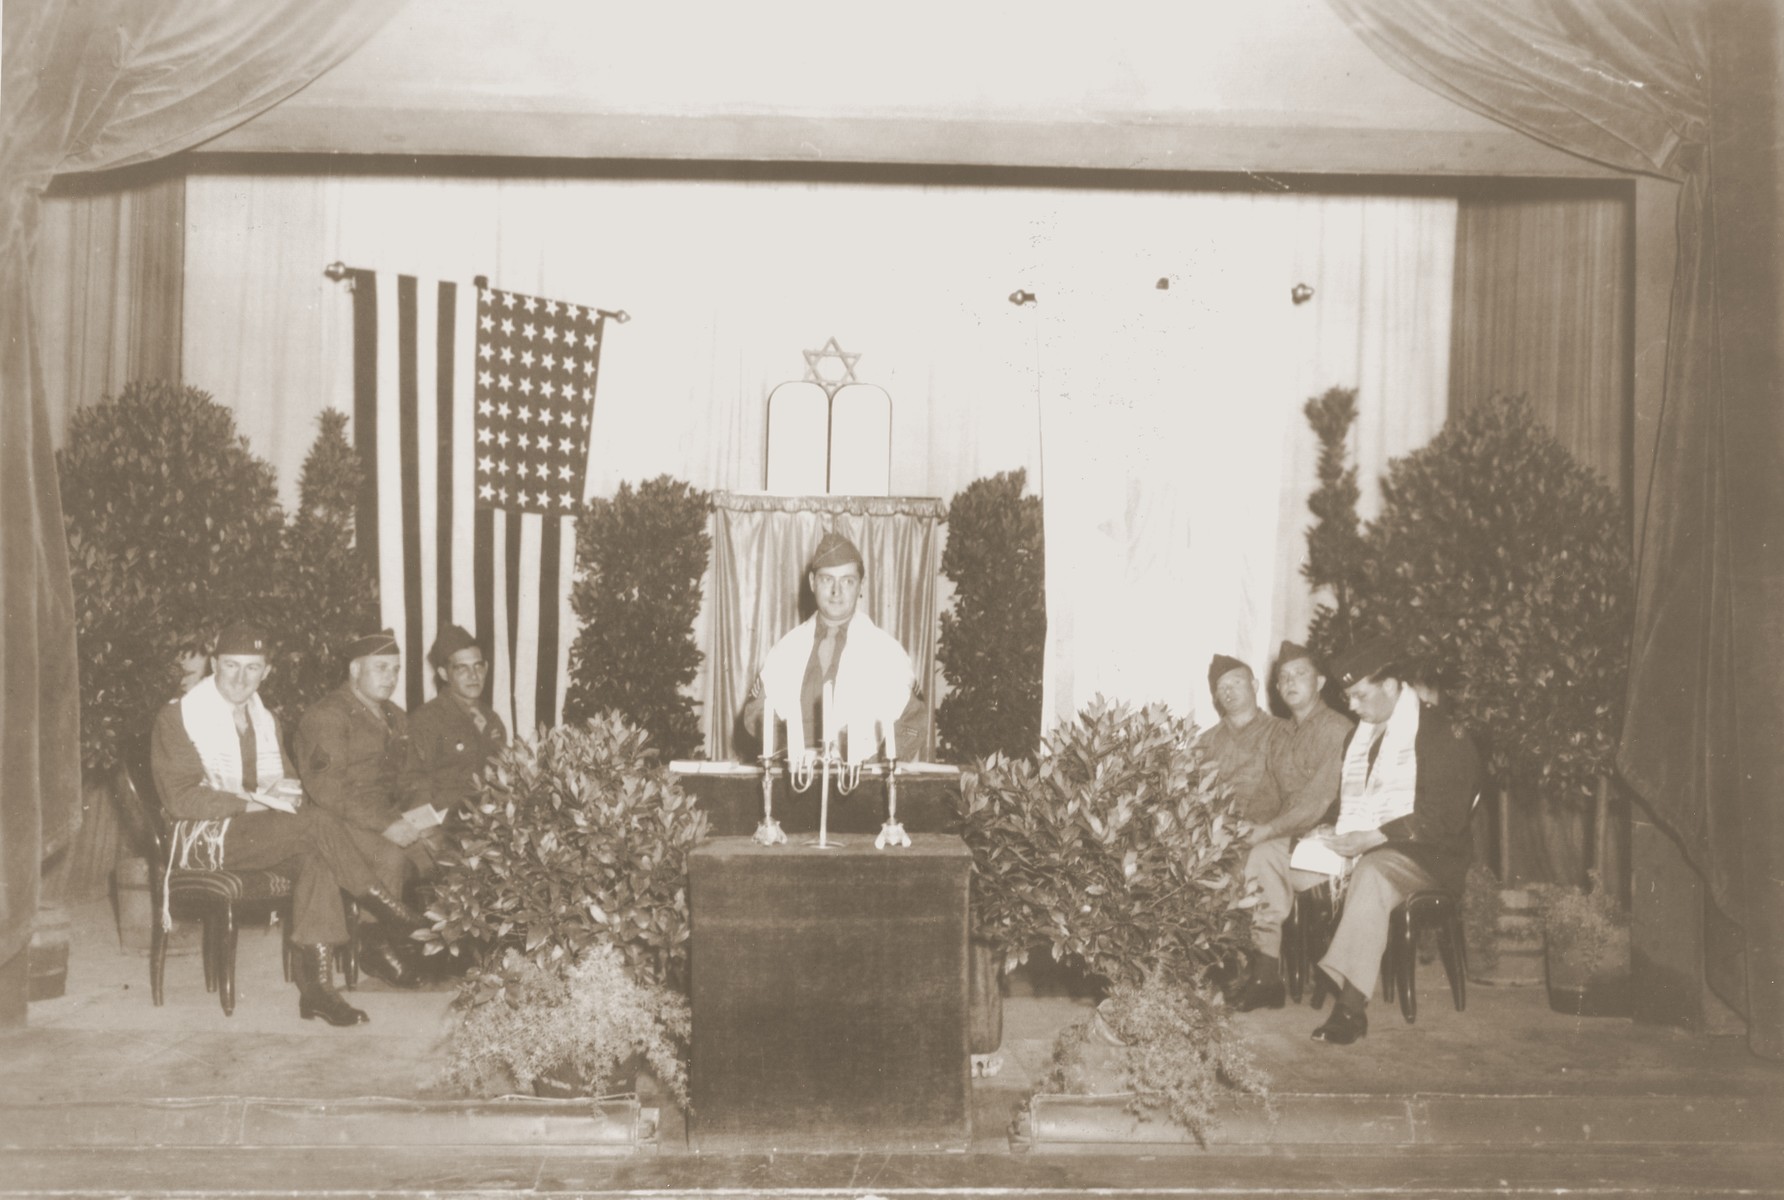 American Jewish soldiers conduct religious services in Germany.